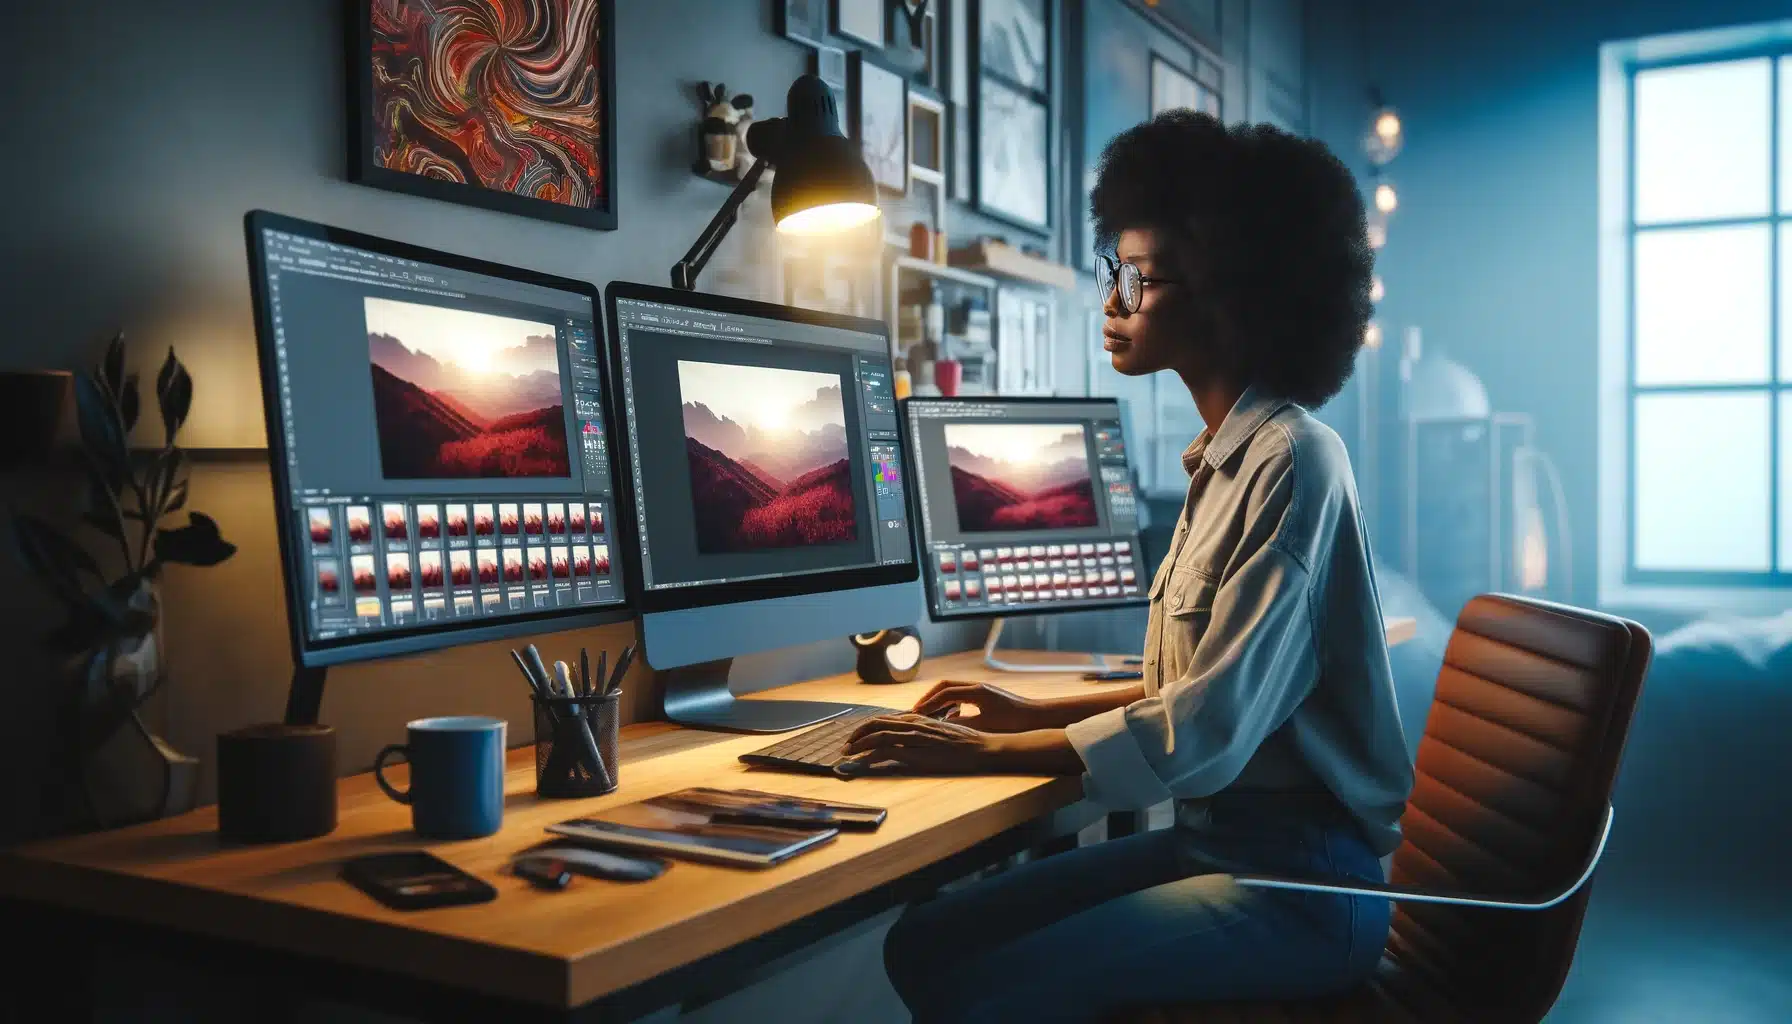 A Black woman in her early thirties, wearing glasses and a stylish outfit, is focused on editing photos on Adobe Photoshop at a modern desk with a triple monitor setup. The room is bright and decorated with abstract art.